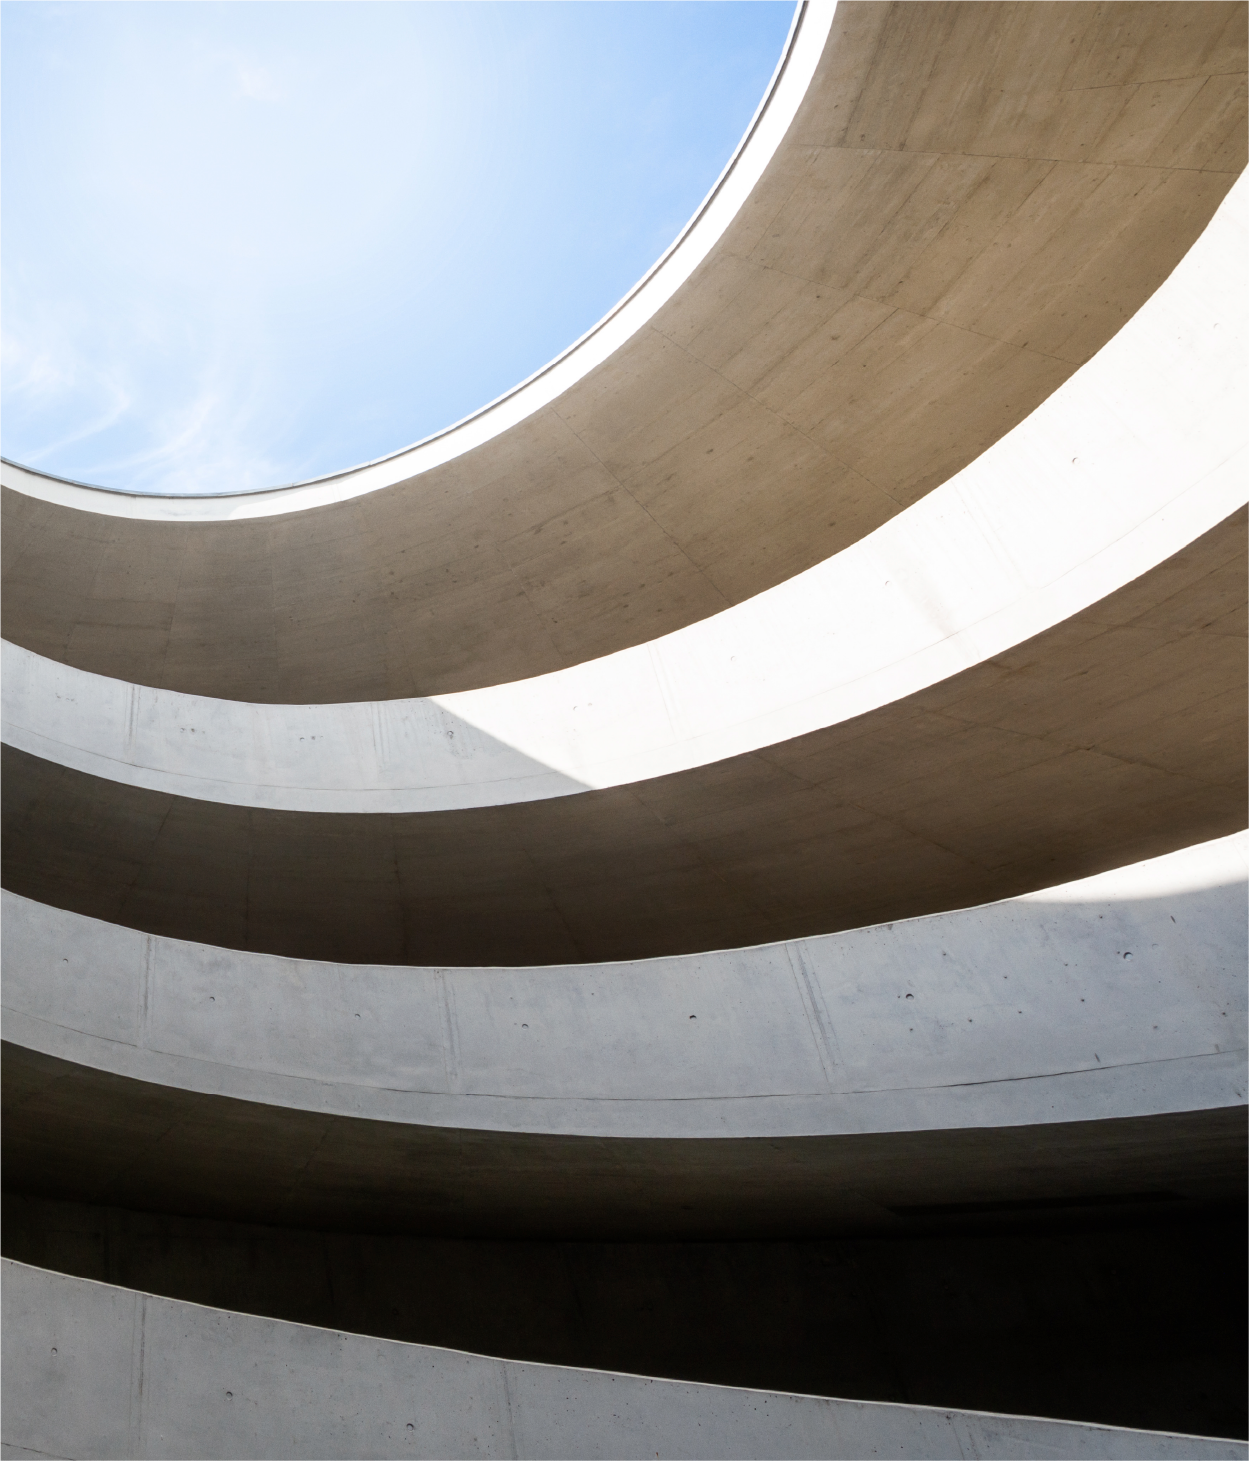 Abstract image of curved parking garage ramps